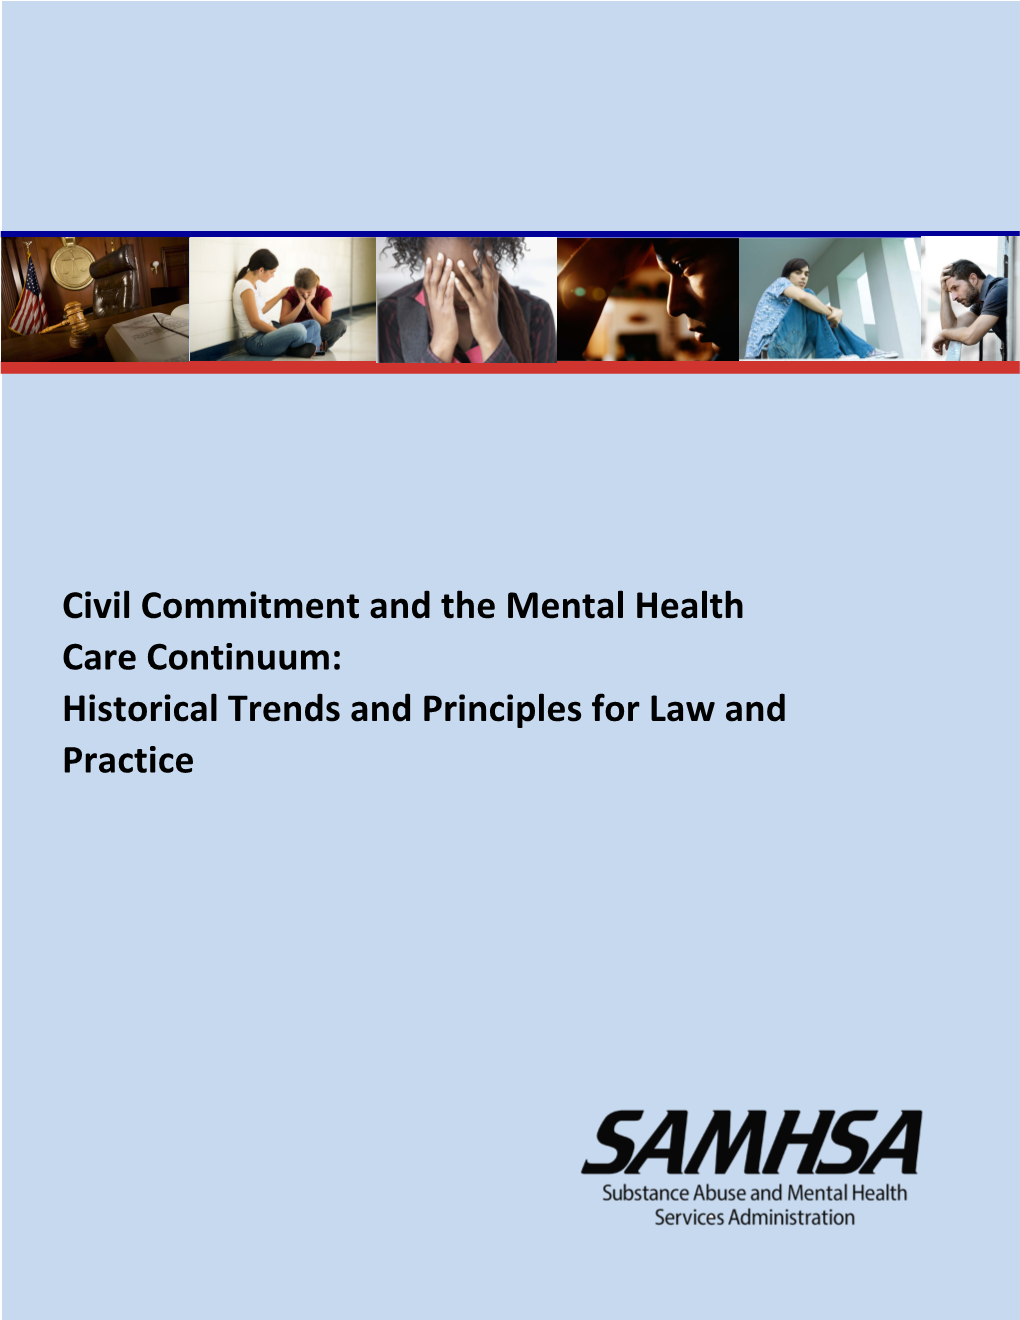 Civil Commitment and the Mental Health Care Continuum: Historical Trends and Principles for Law and Practice